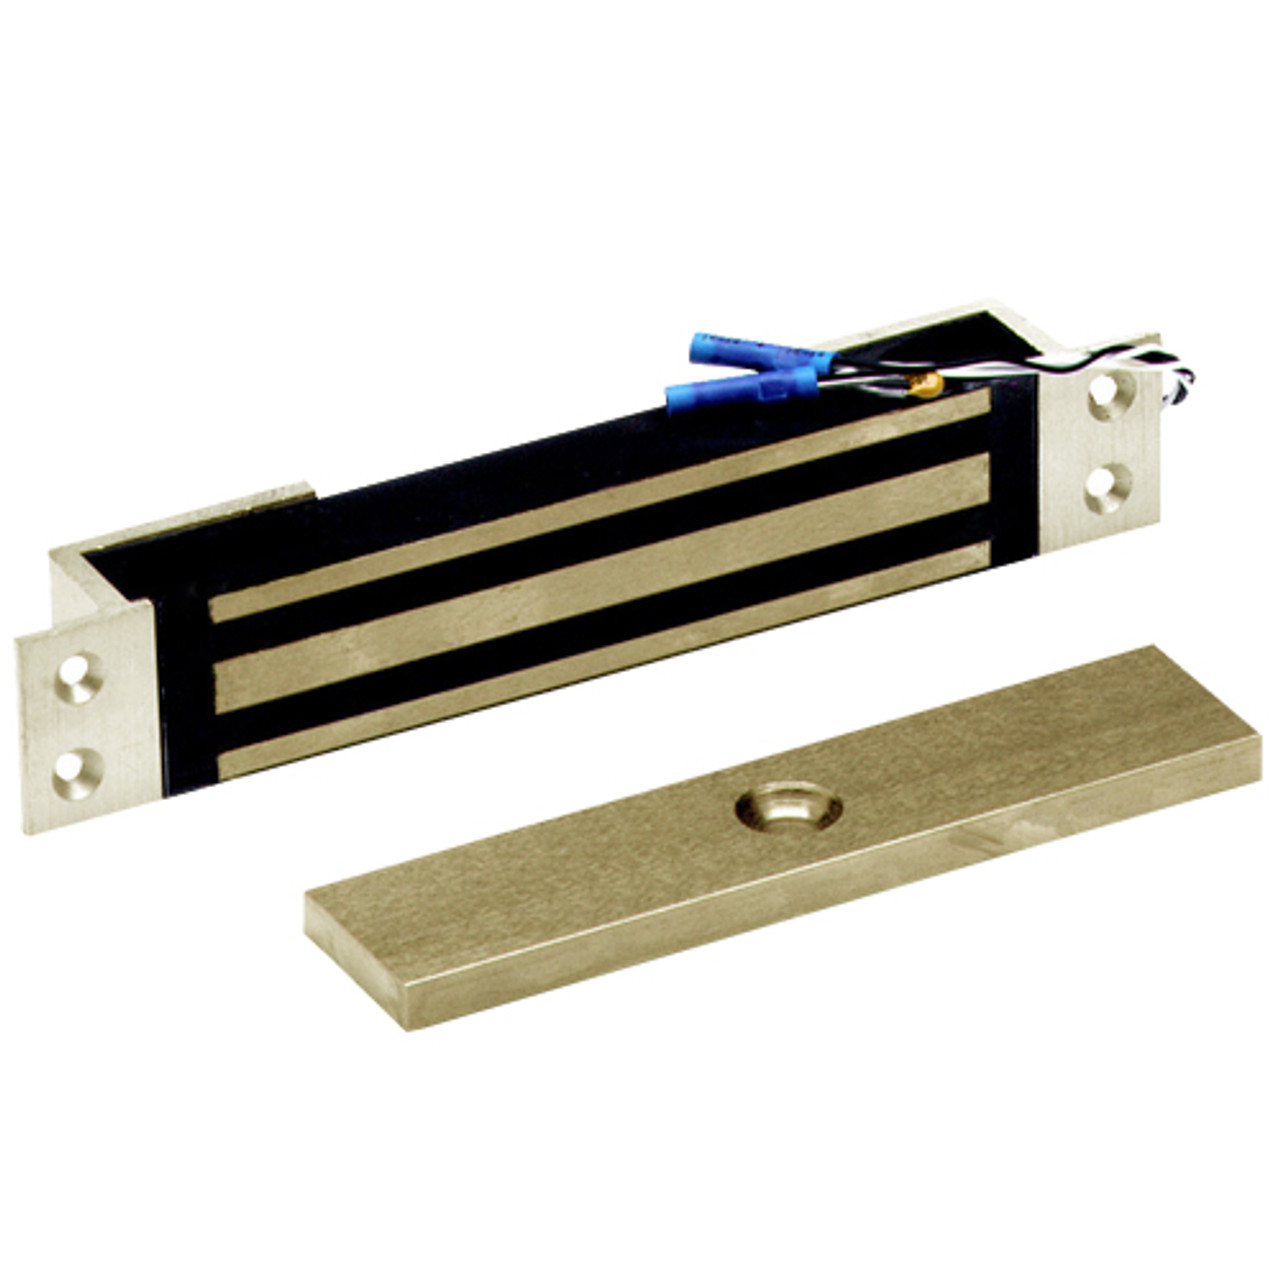 2600-MB-US4 DynaLock 2600 Series 650 LBs Single Mortise Mini Electromagnetic Lock with Mounting Brackets in Satin Brass